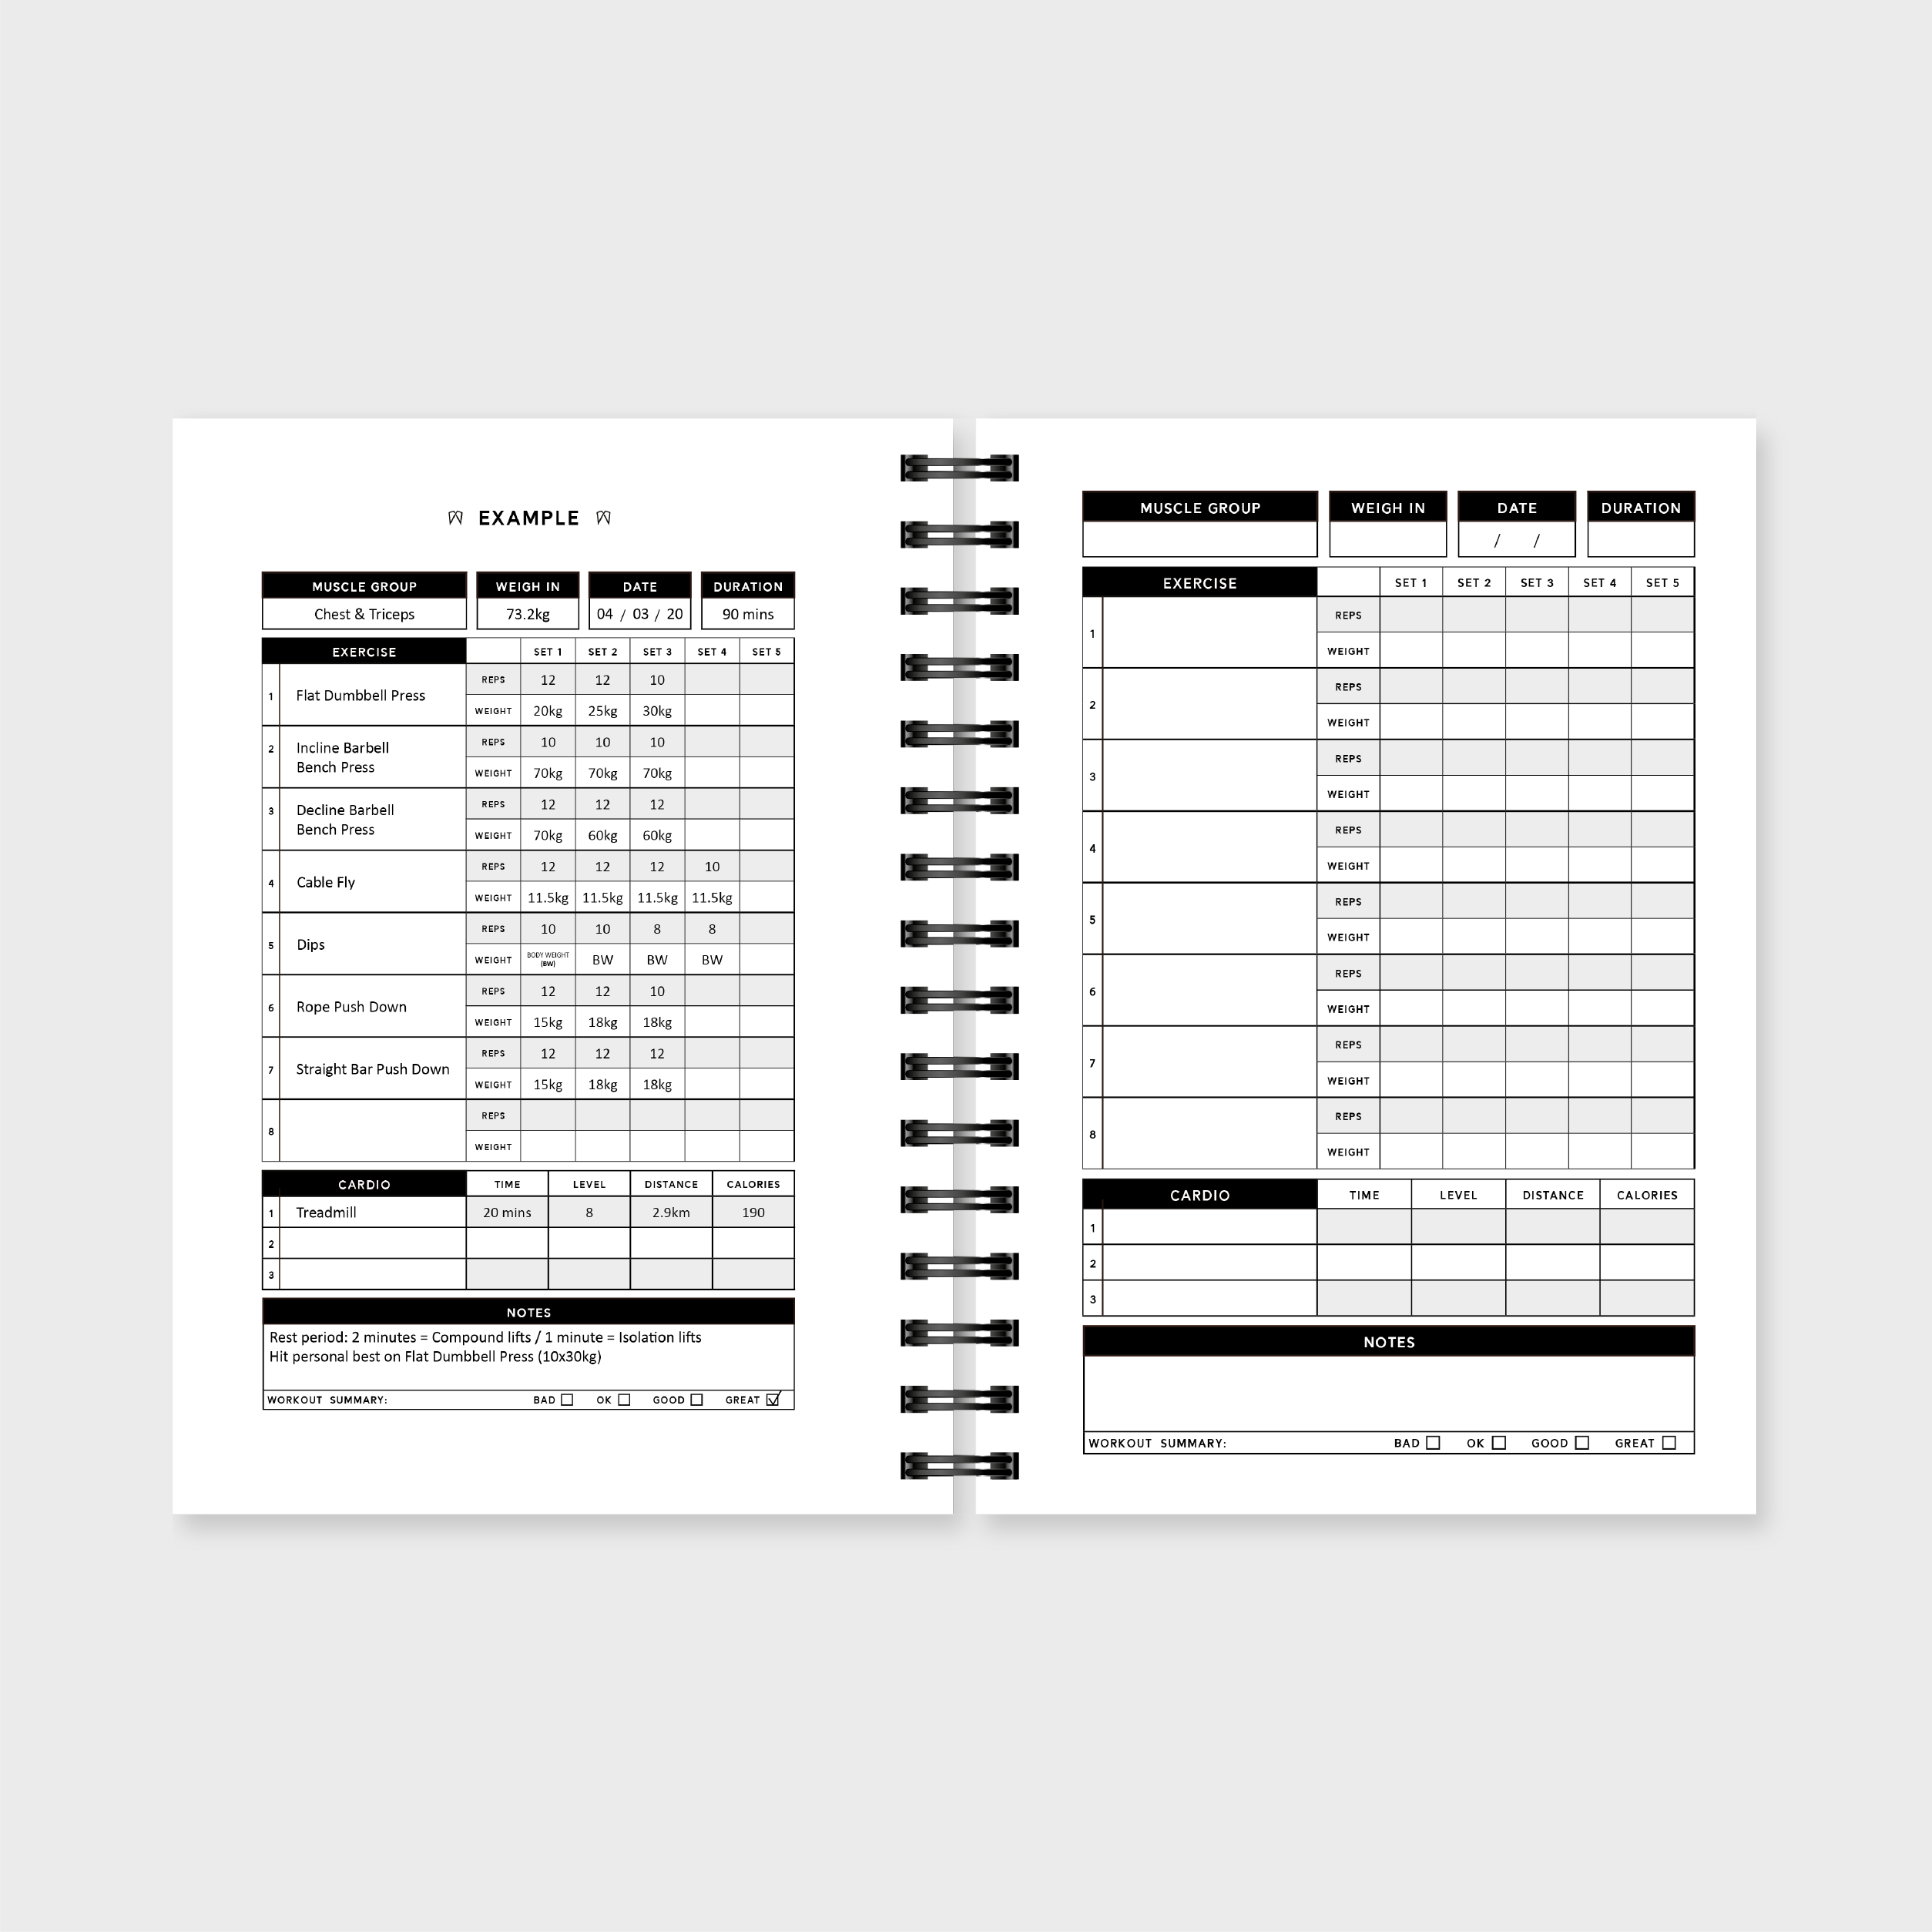 Exercise Journal (A5), Workout Logbook